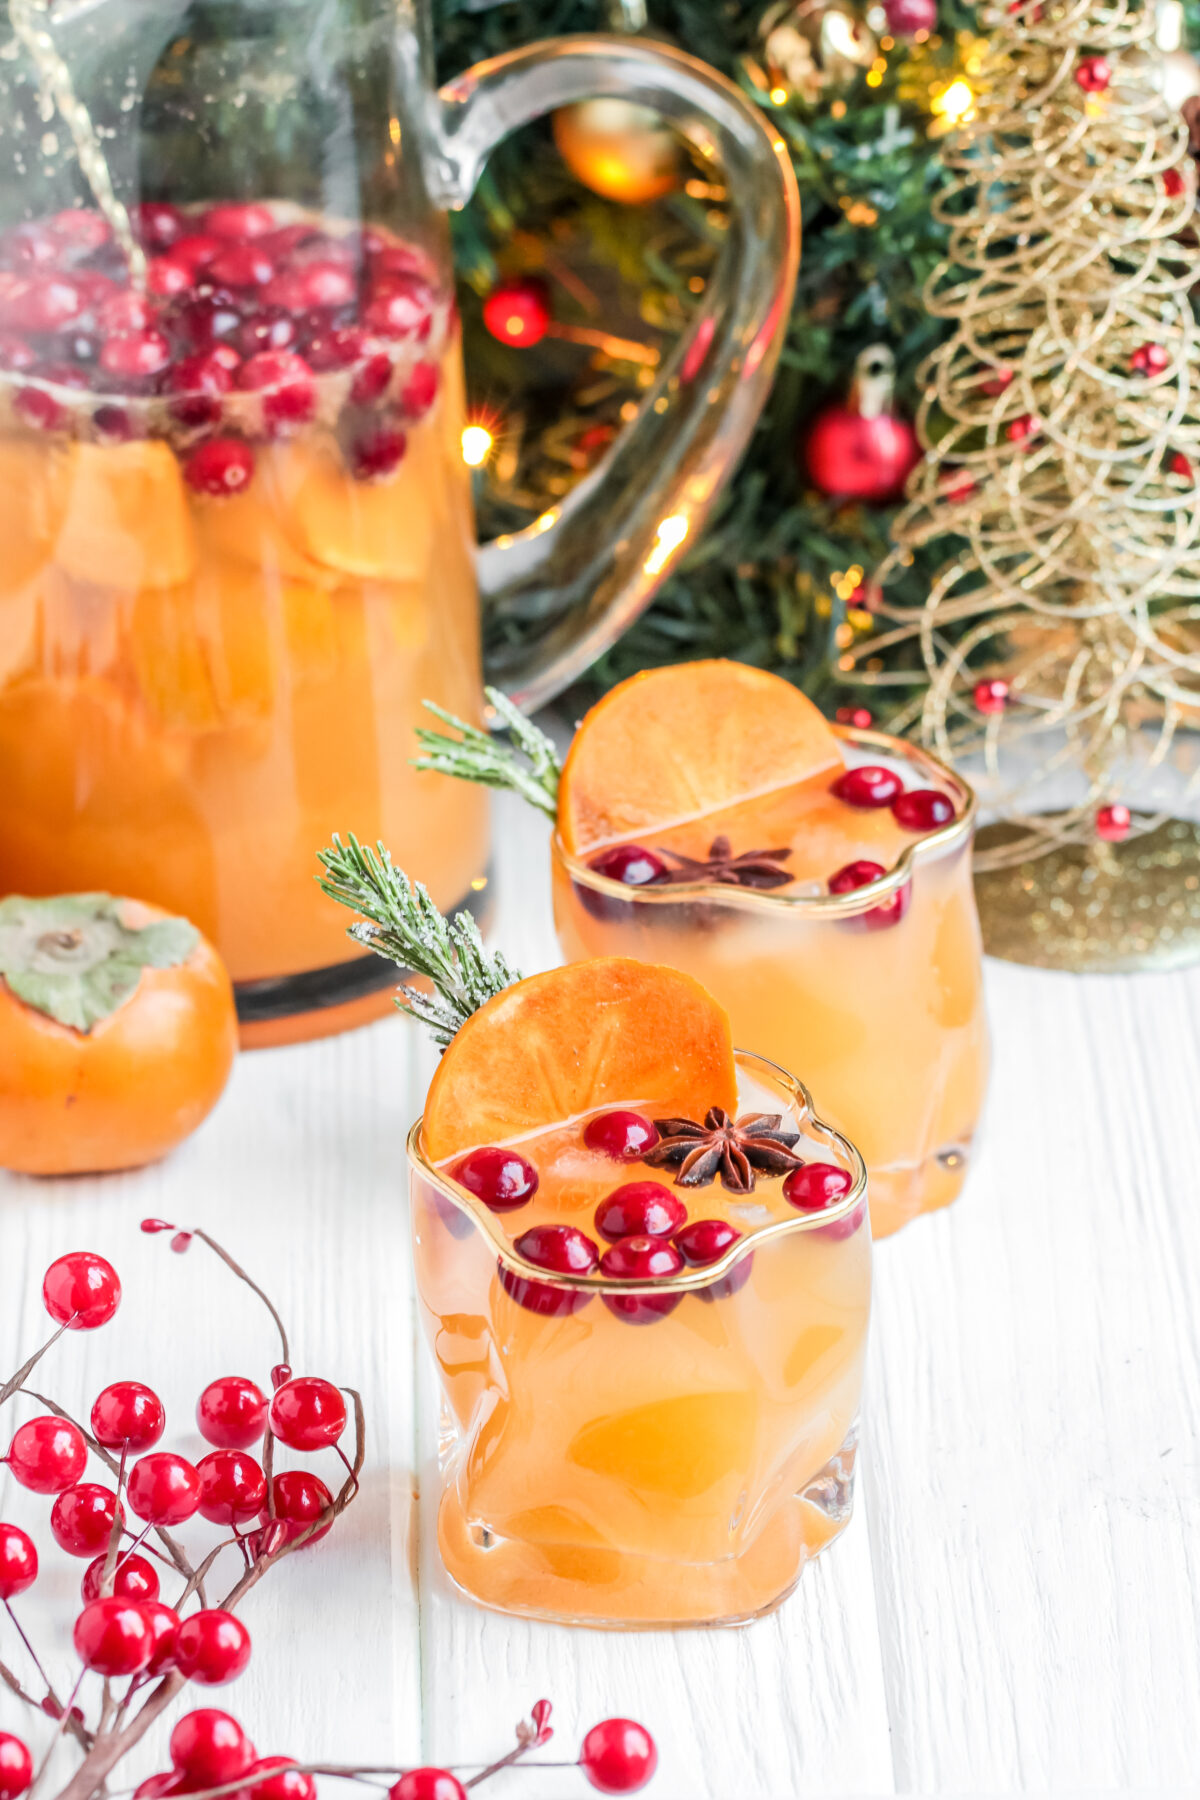 Ring in the Christmas season with this delicious and festive Persimmon White Wine Sangria Recipe! Perfect for holiday parties!